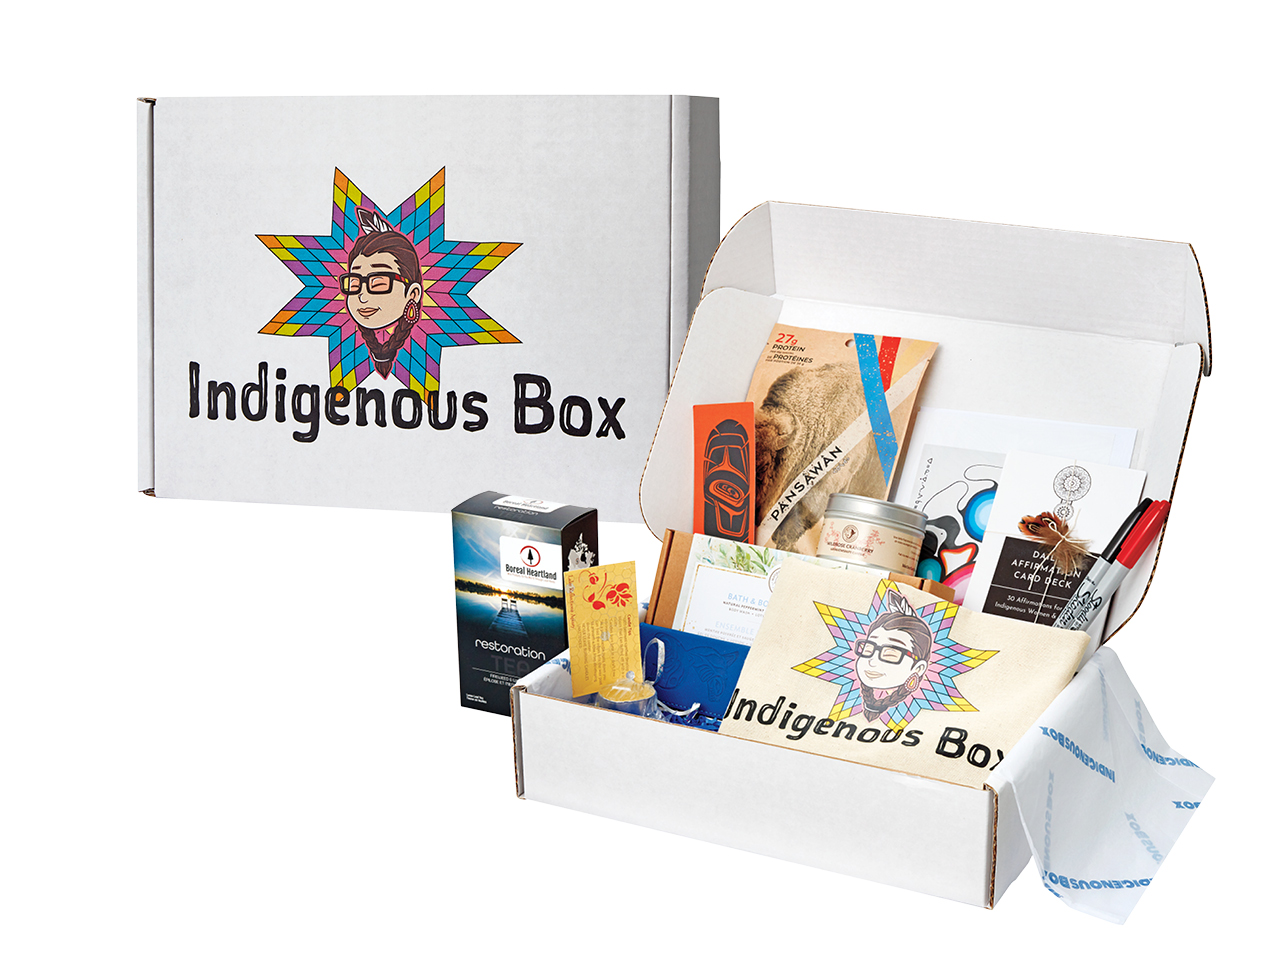 An Indigenous Box sits on the left side, closed to show the company's logo, and another sits on the right beside it, showcasing the gifts that are offered inside